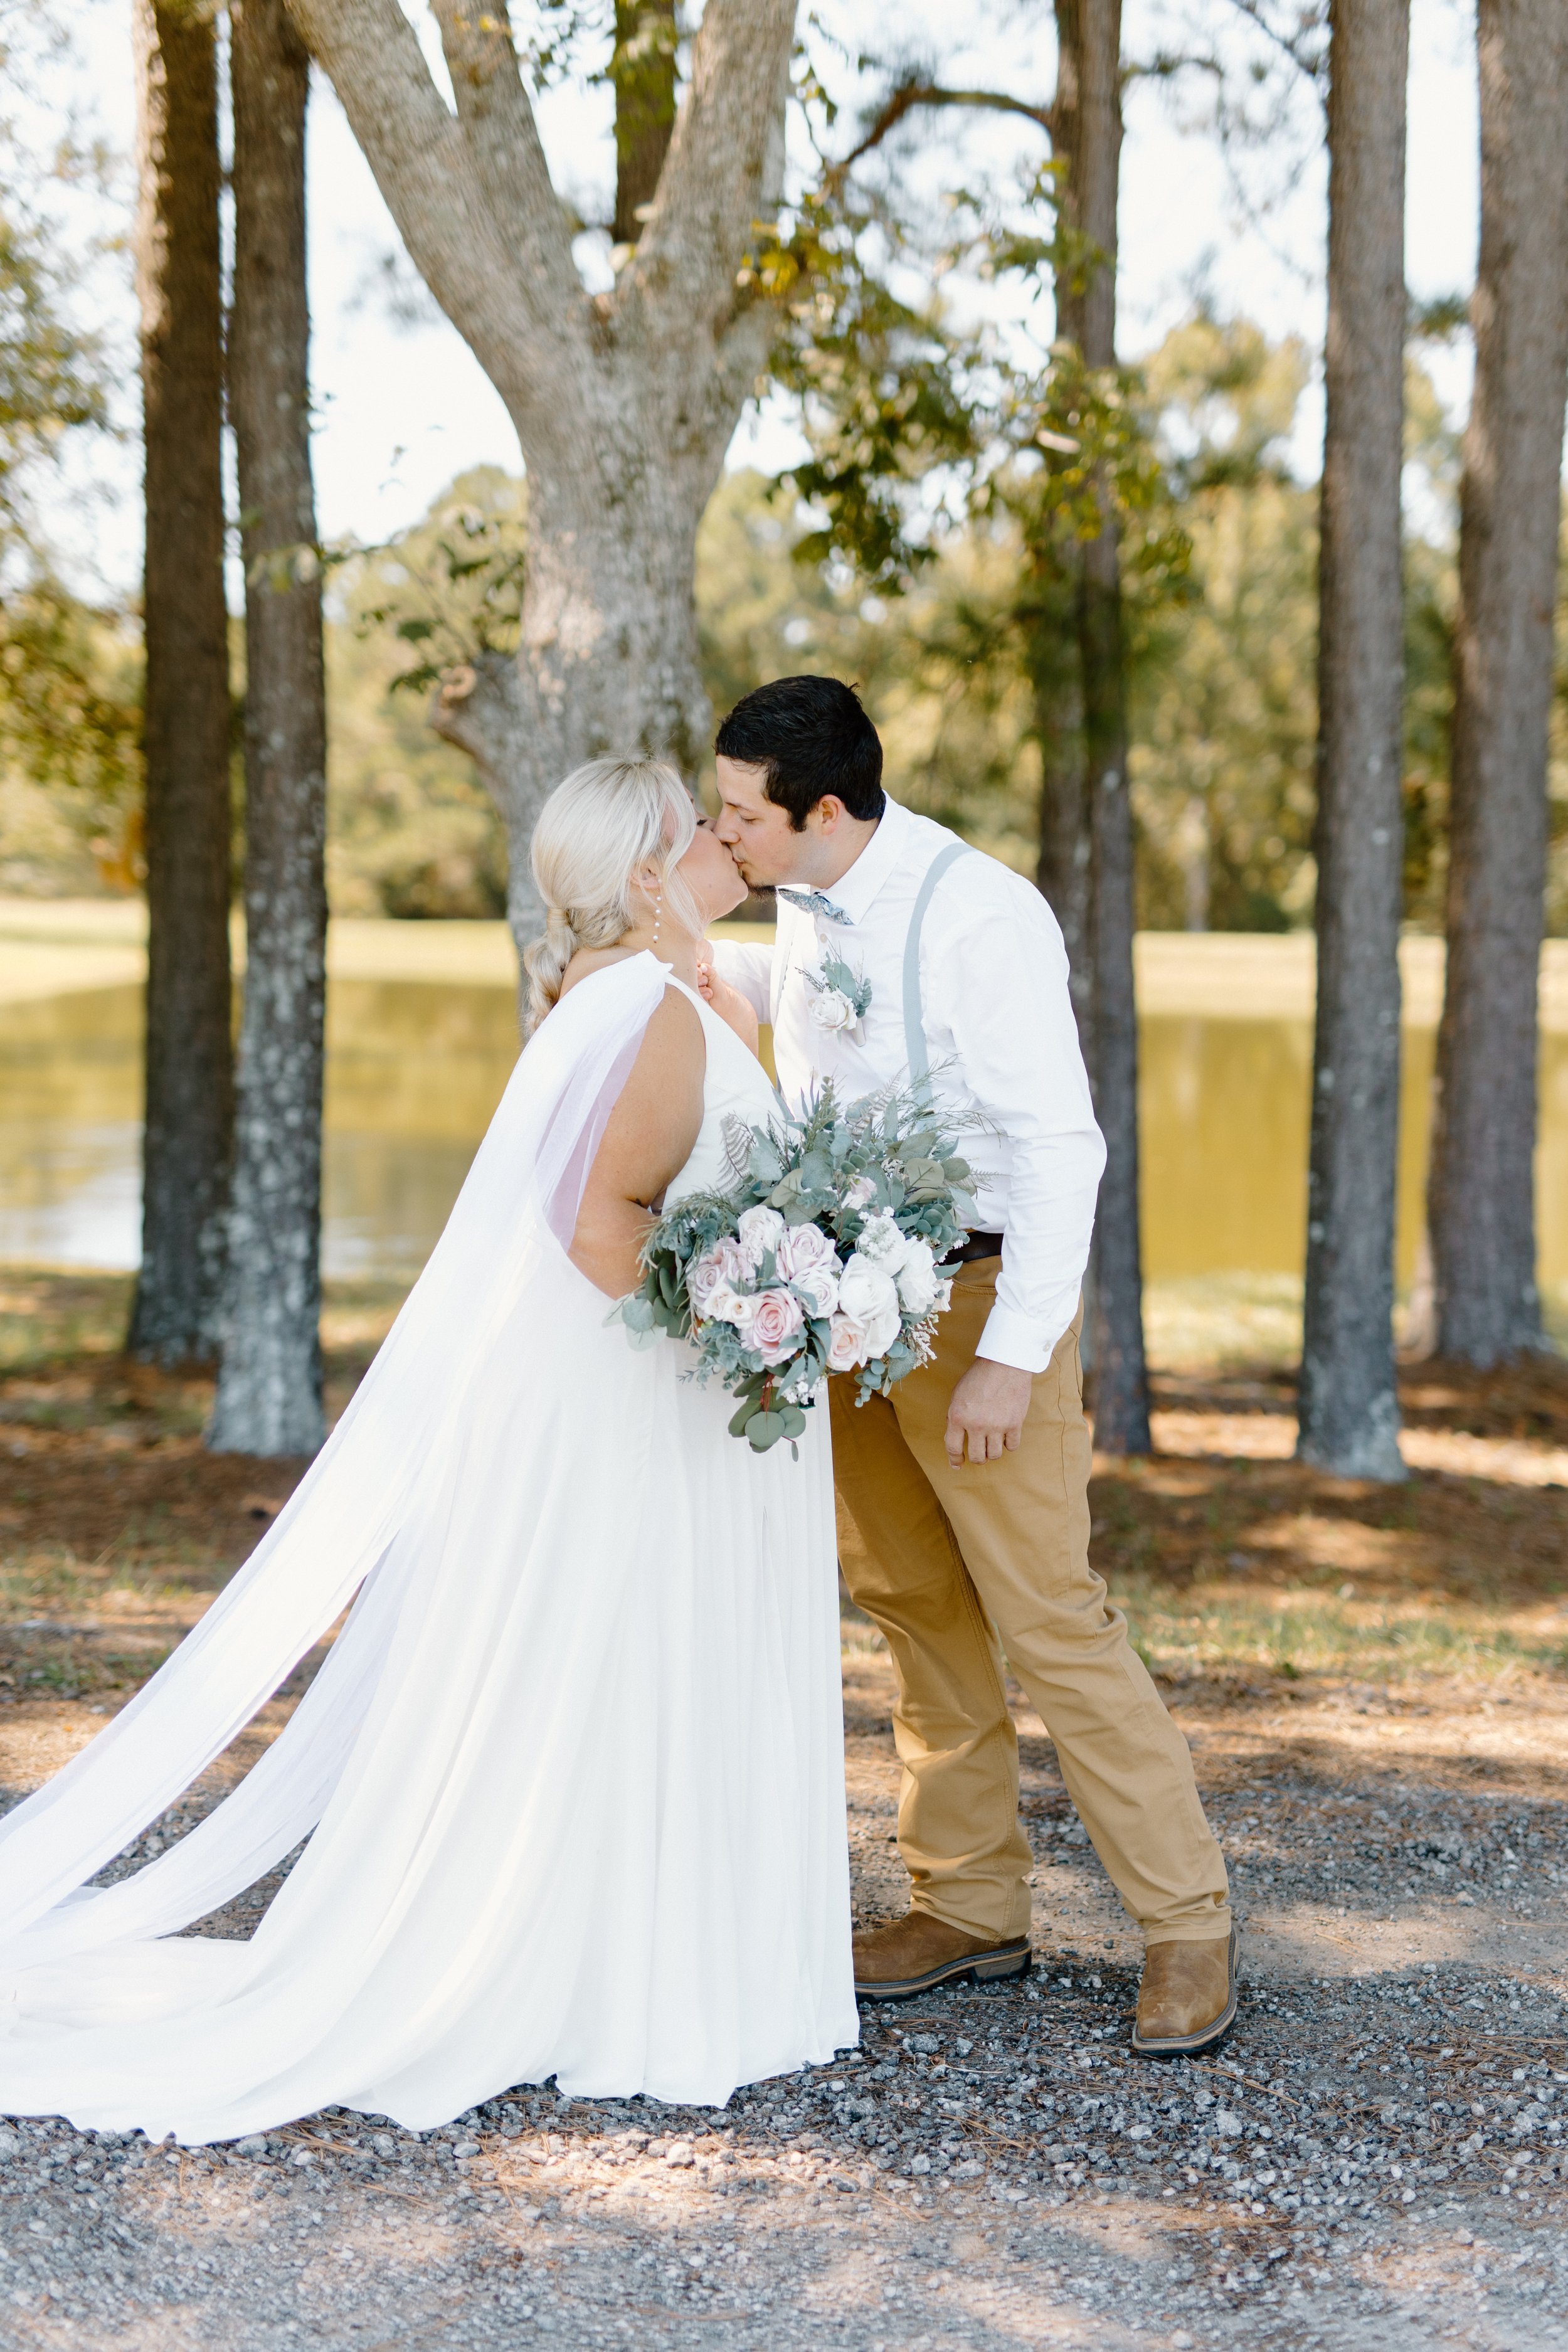 ivory-and-beau-blog-down-for-the-gown-ashley-real-bride-made-with-love-bridal-wedding-dress-bridal-gown-wedding-gown-southern-bride-savannah-bridal-shop-ivory-and-beau-bride-savannah-georgia-MY5A6794.jpg